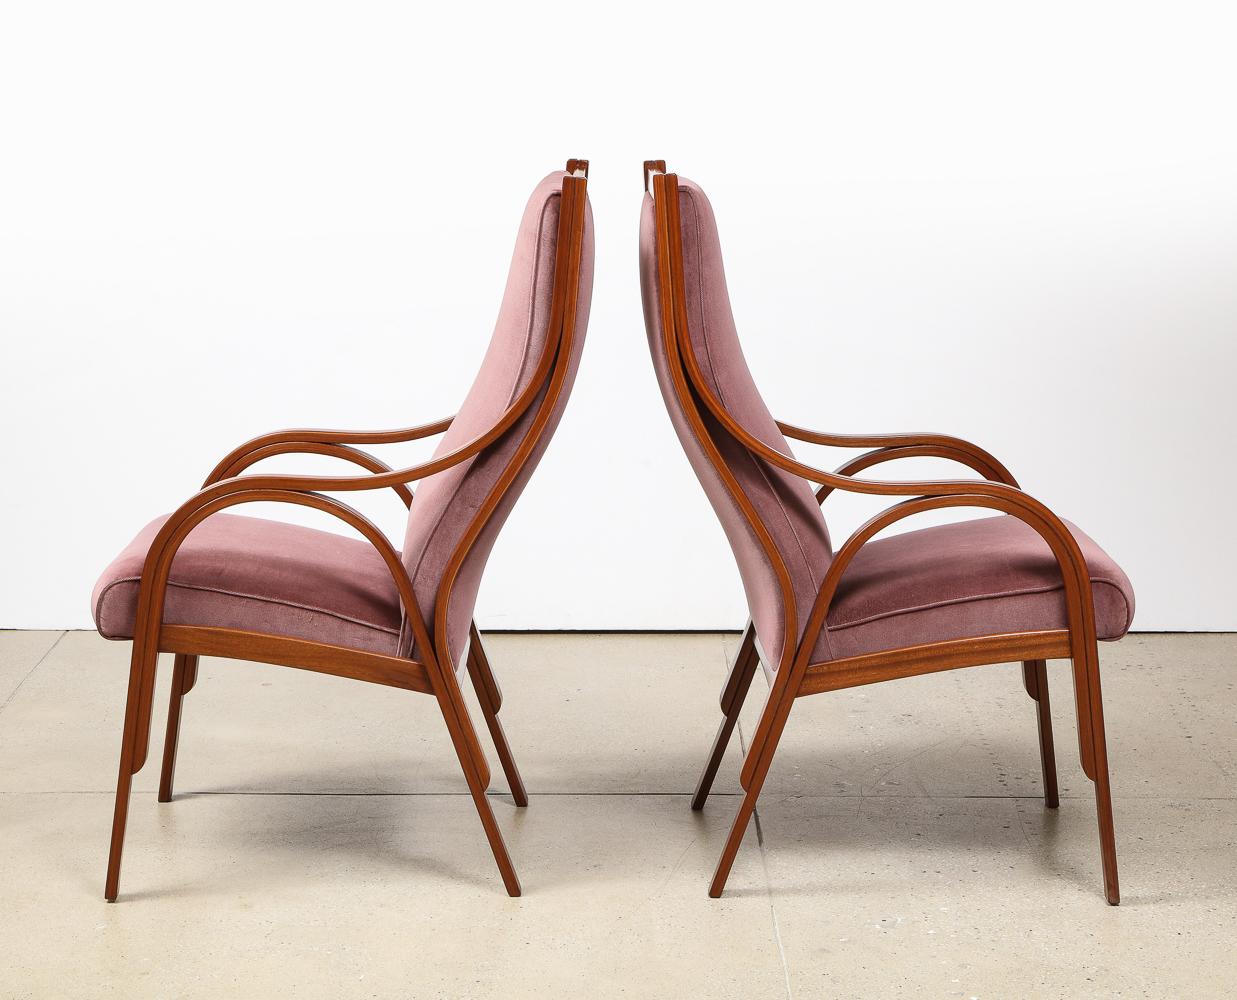 Bent wood, velvet upholstery. Tall back armchairs can be used as desk chair, dining chair, or side chairs. Produced by Sim and awarded an honorable mention in 1960s Compasso d’Oro. Wood has been refinished and seats reupholstered on two chairs.